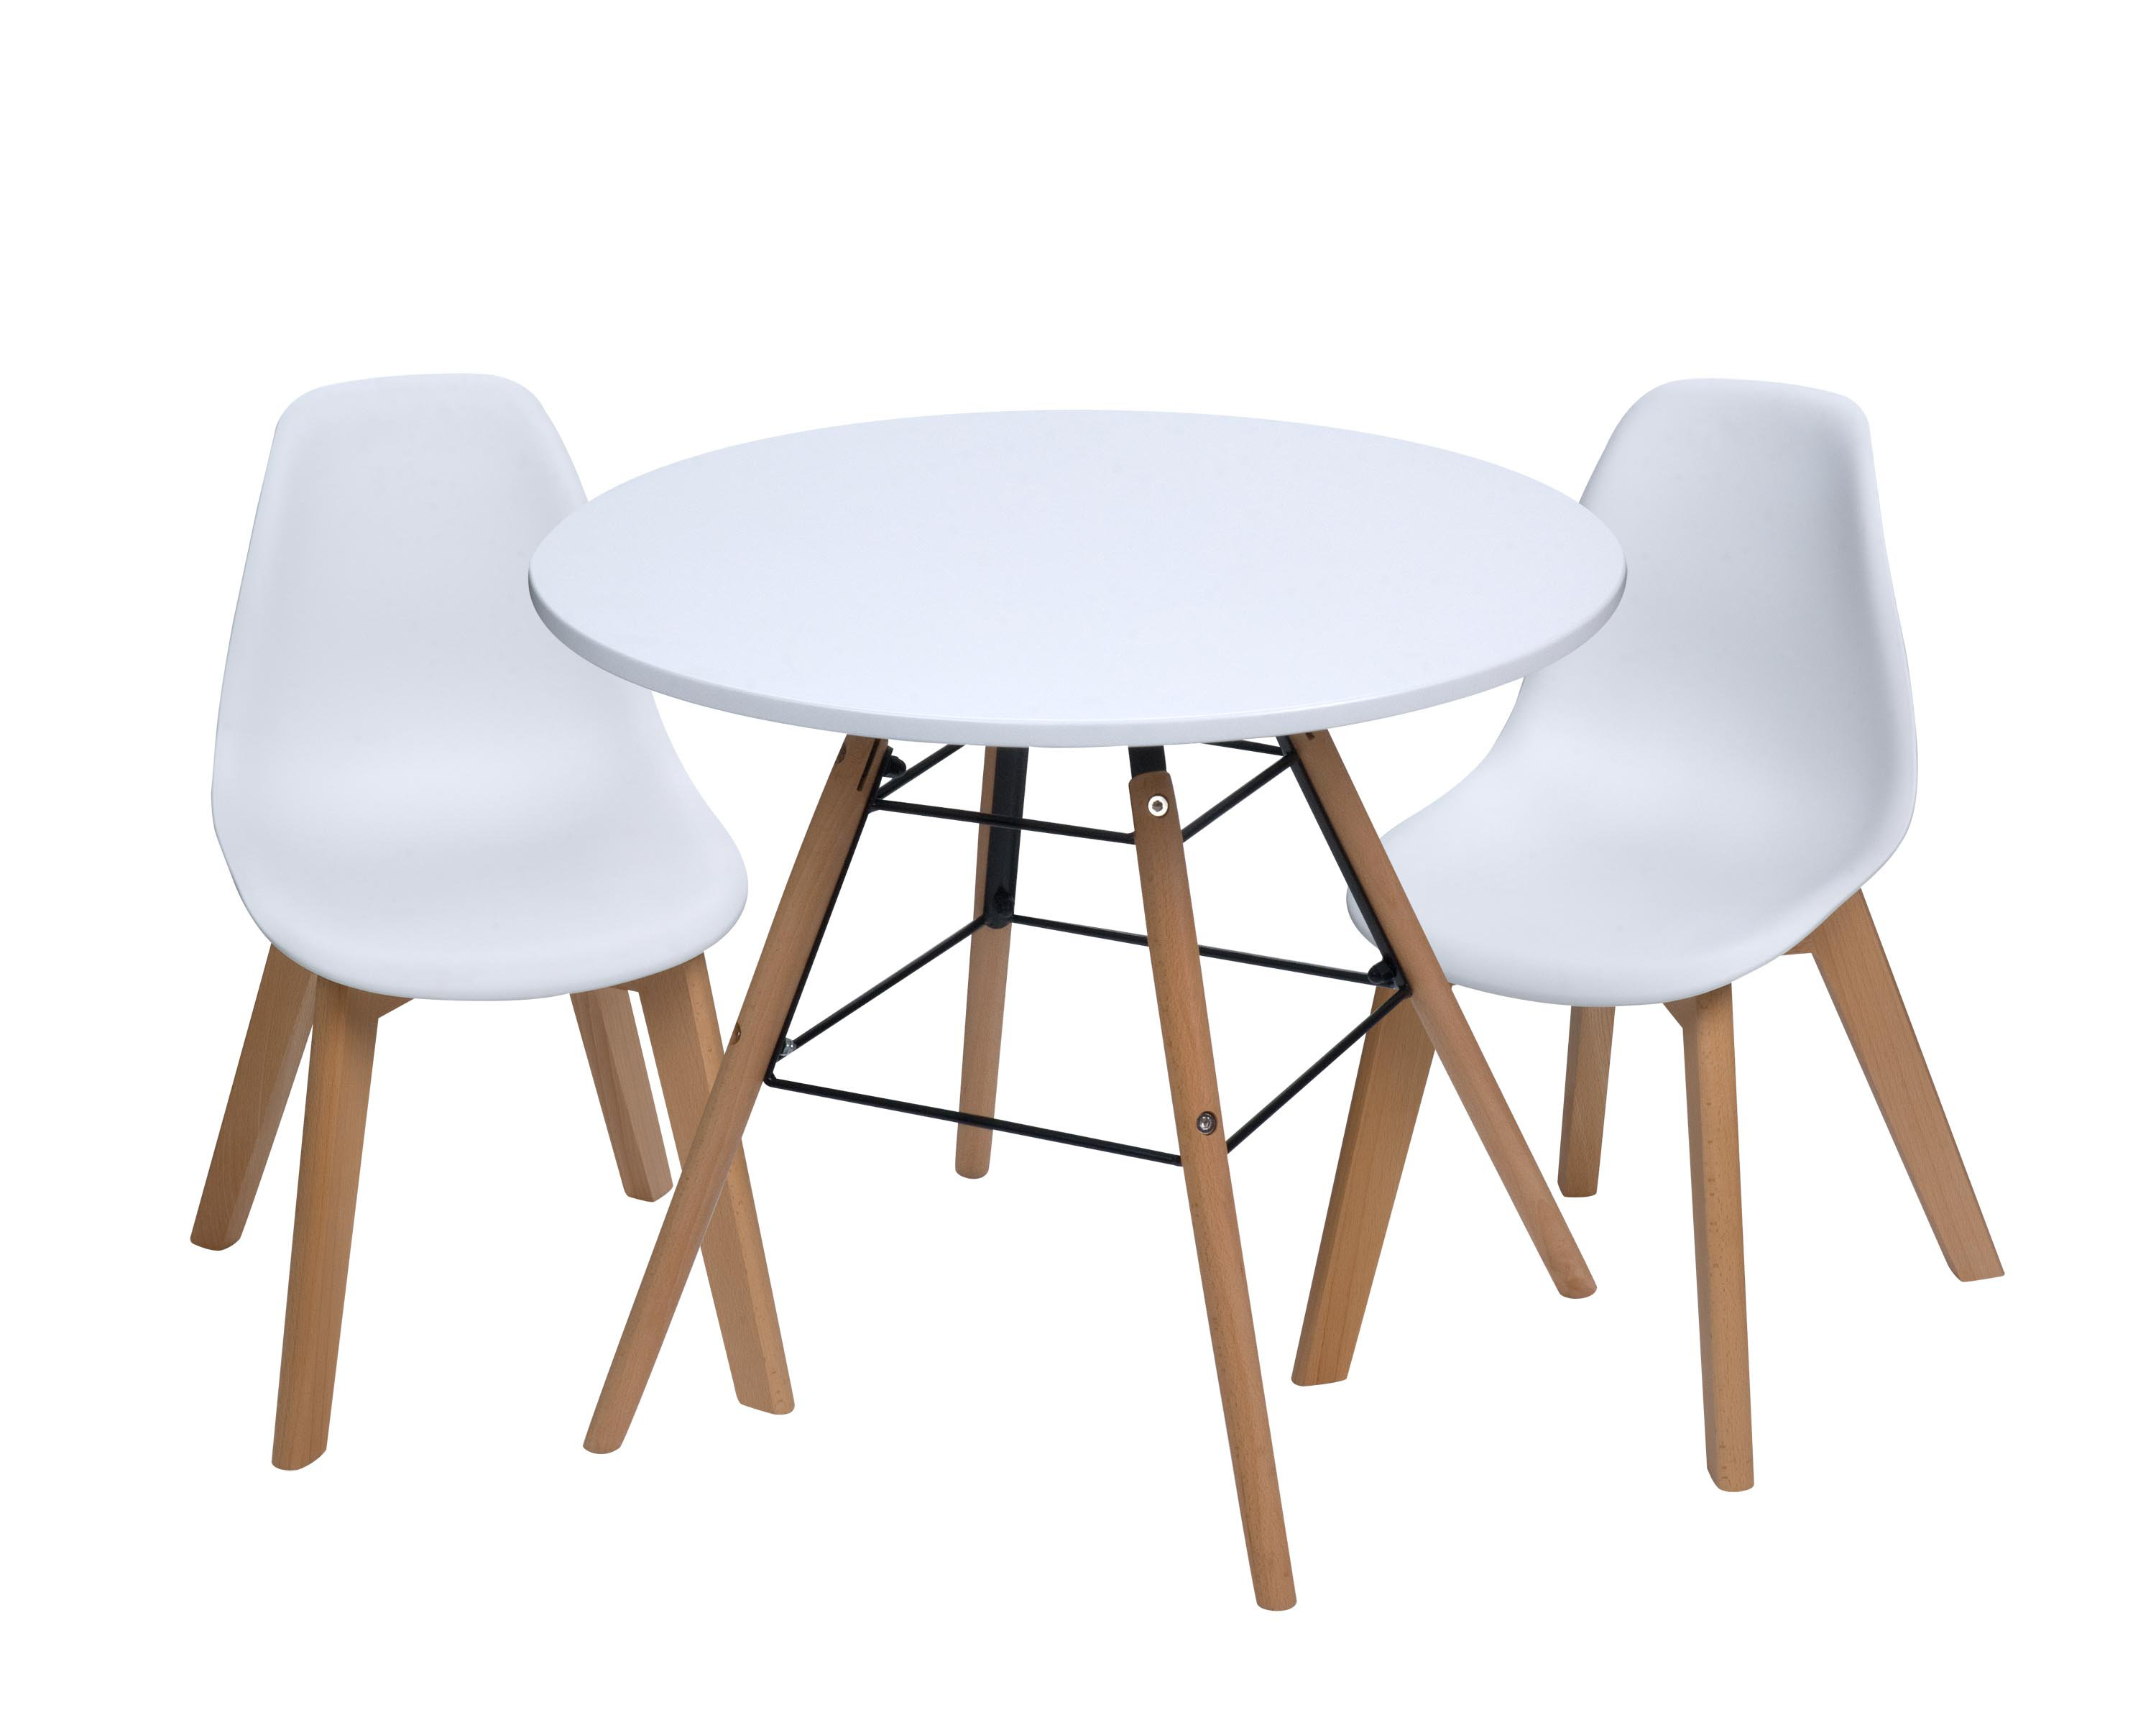 Isabelle Max Letendre Kids 3 Piece Round Table And Chair Set